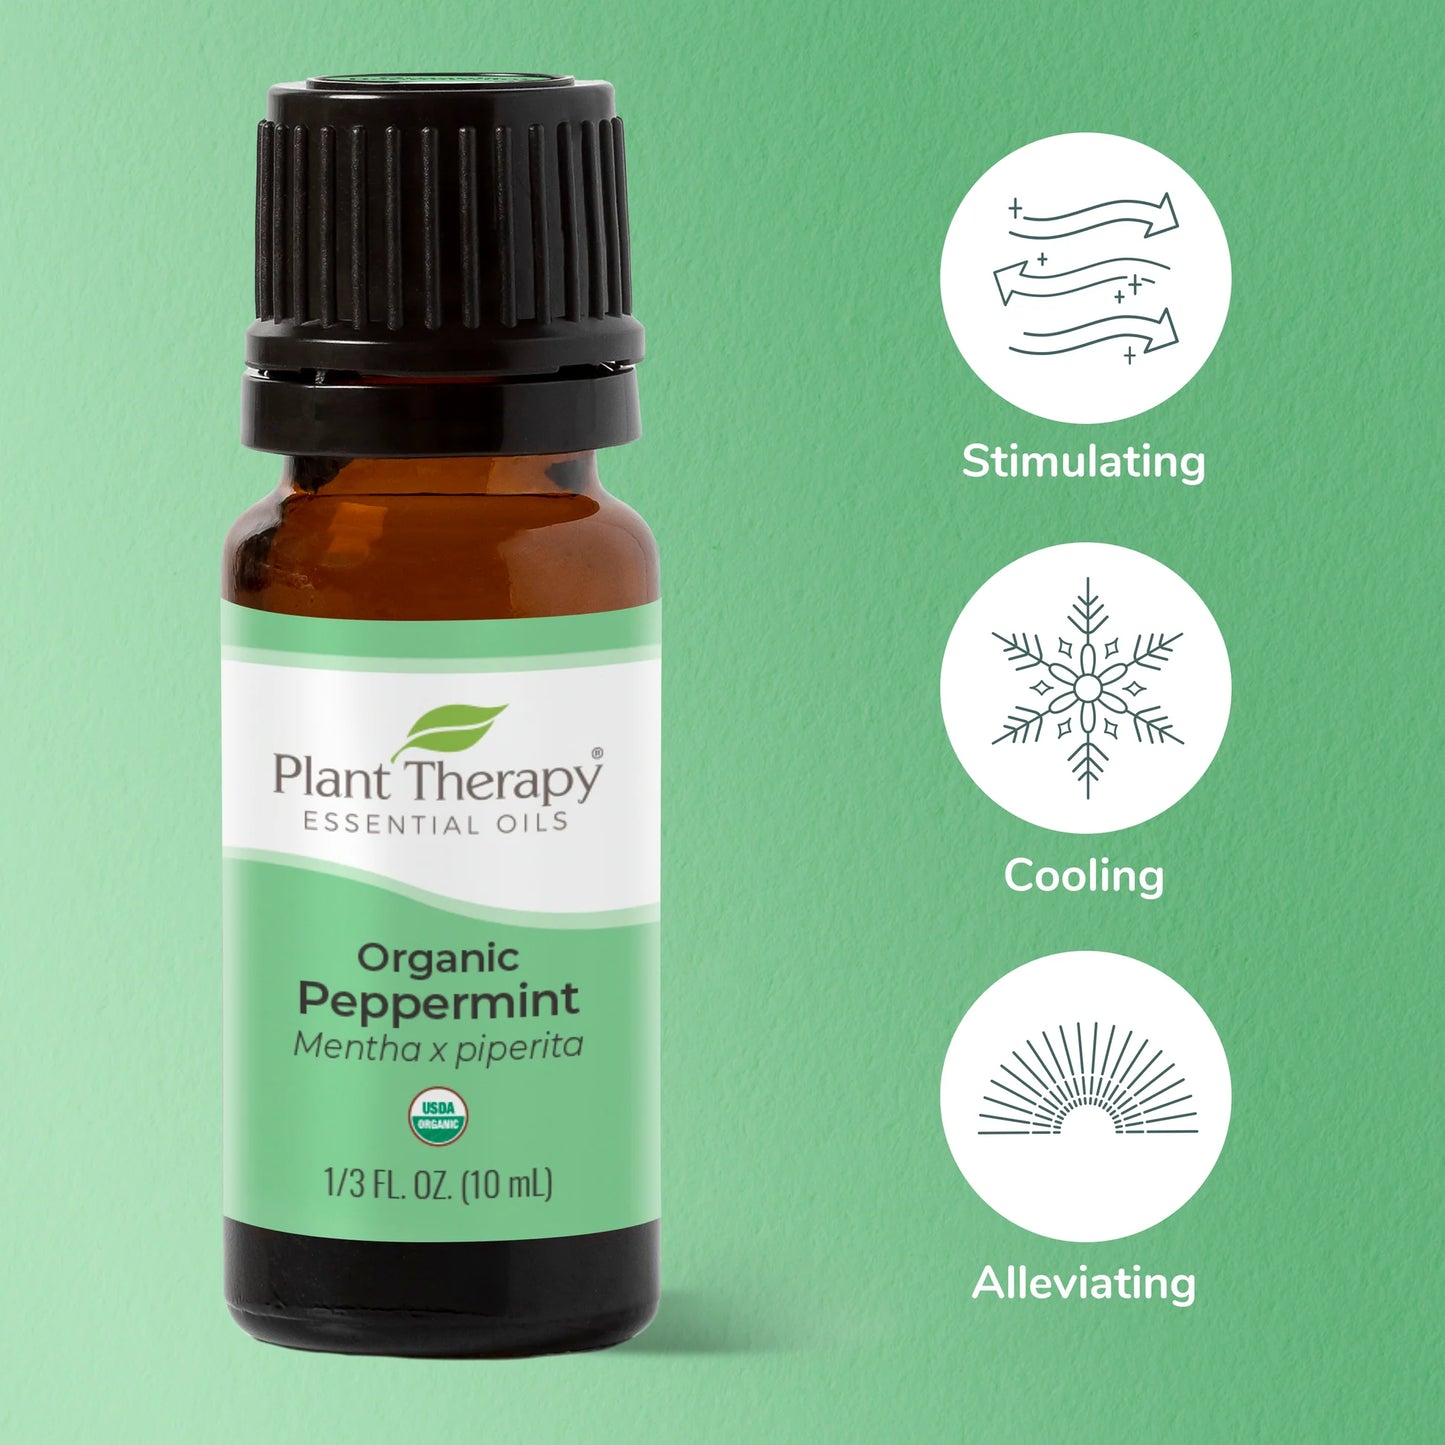 Peppermint EO Plant Therapy